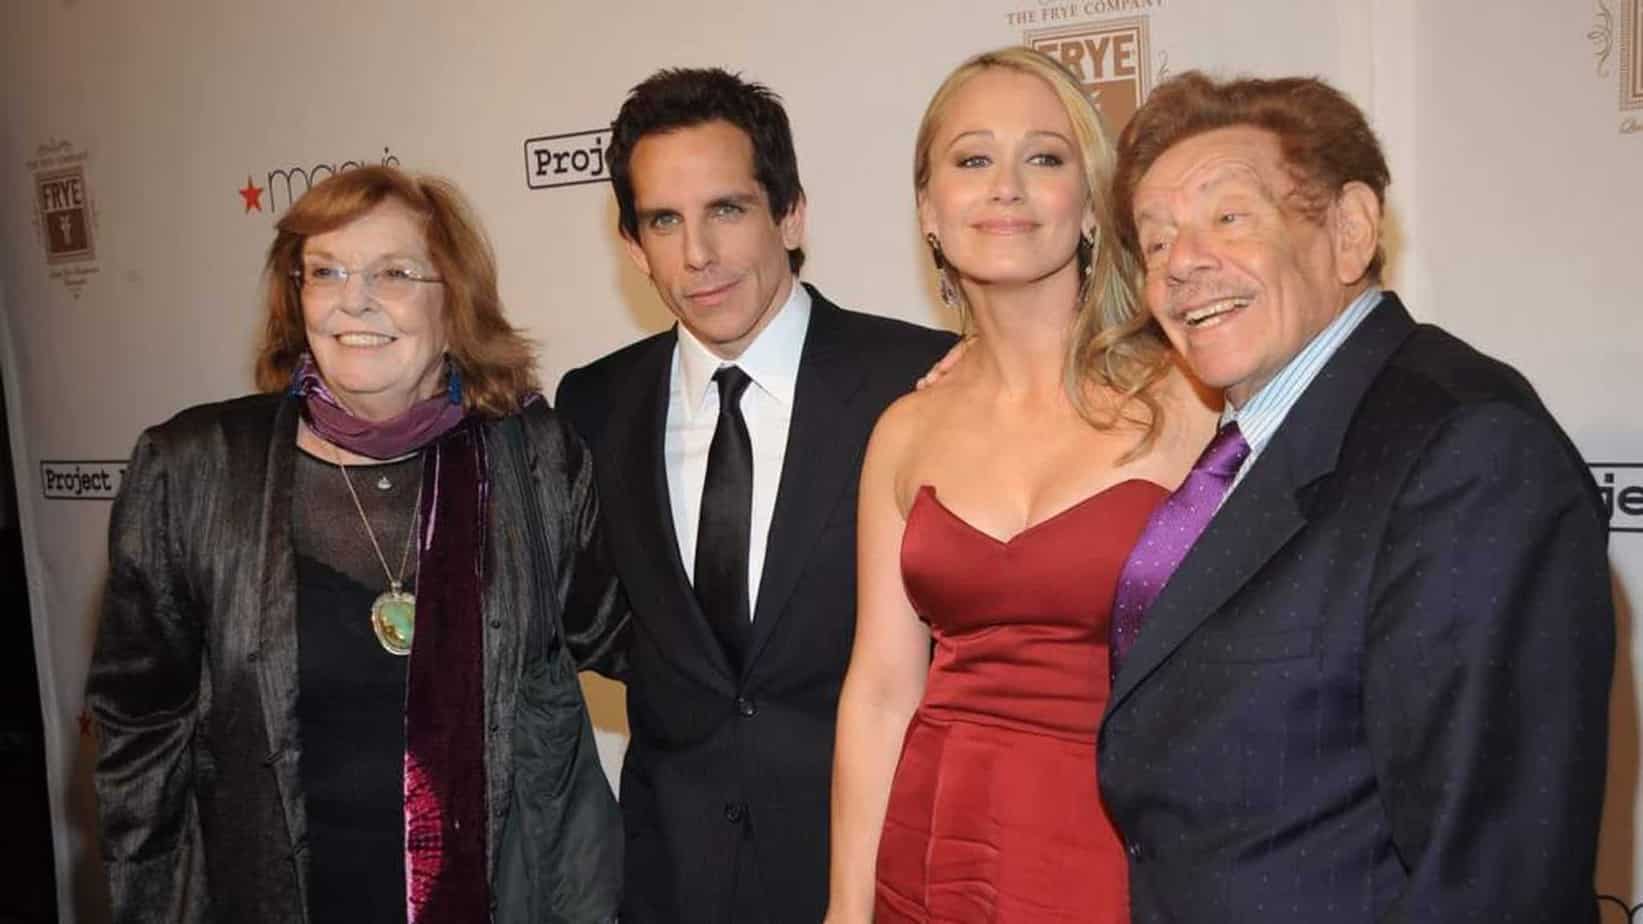 Image of Ben Stiller with his family